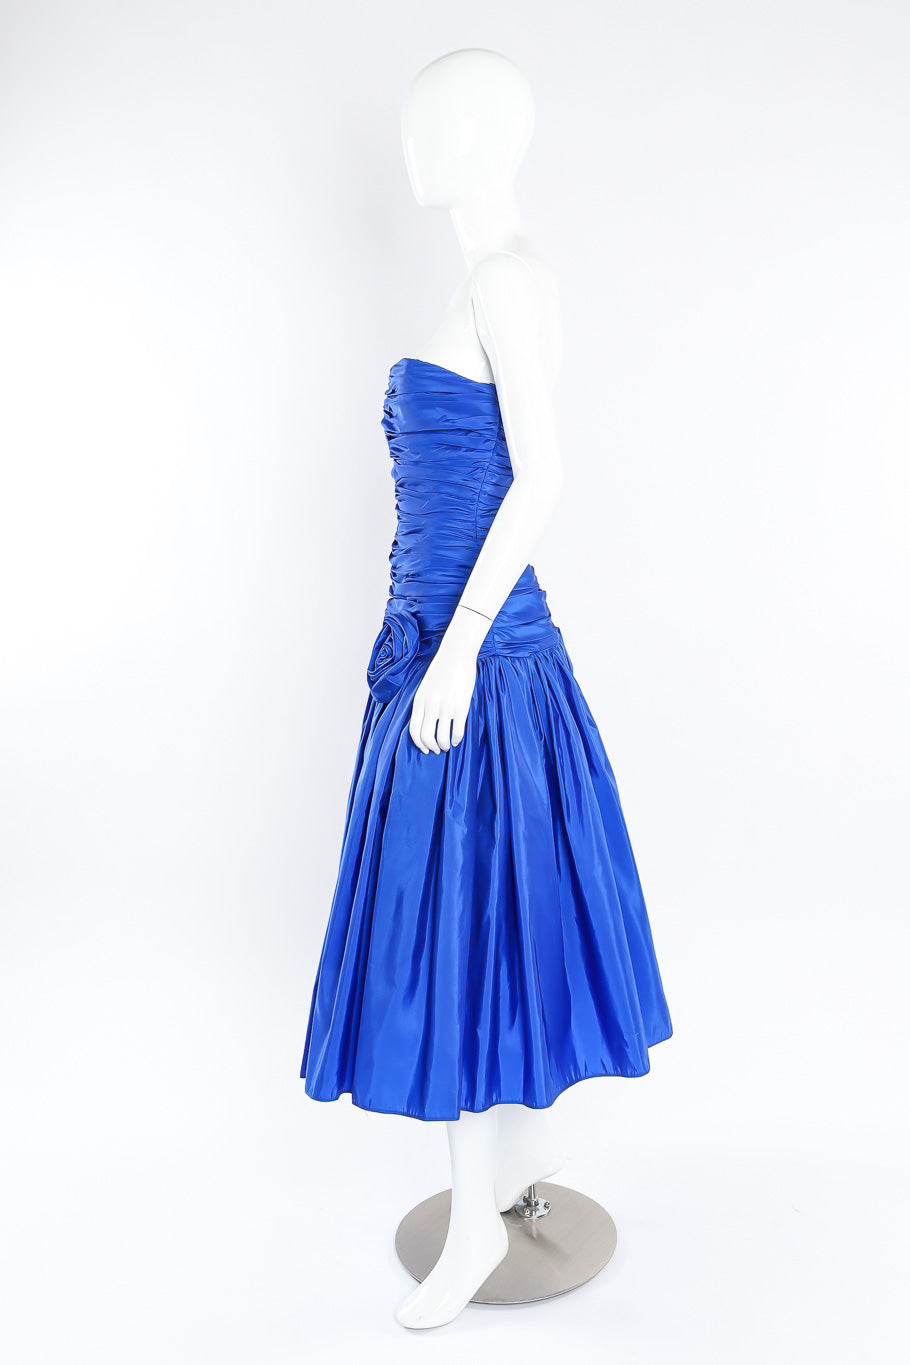 Strapless party dress by Victor Costa on mannequin side full @recessla